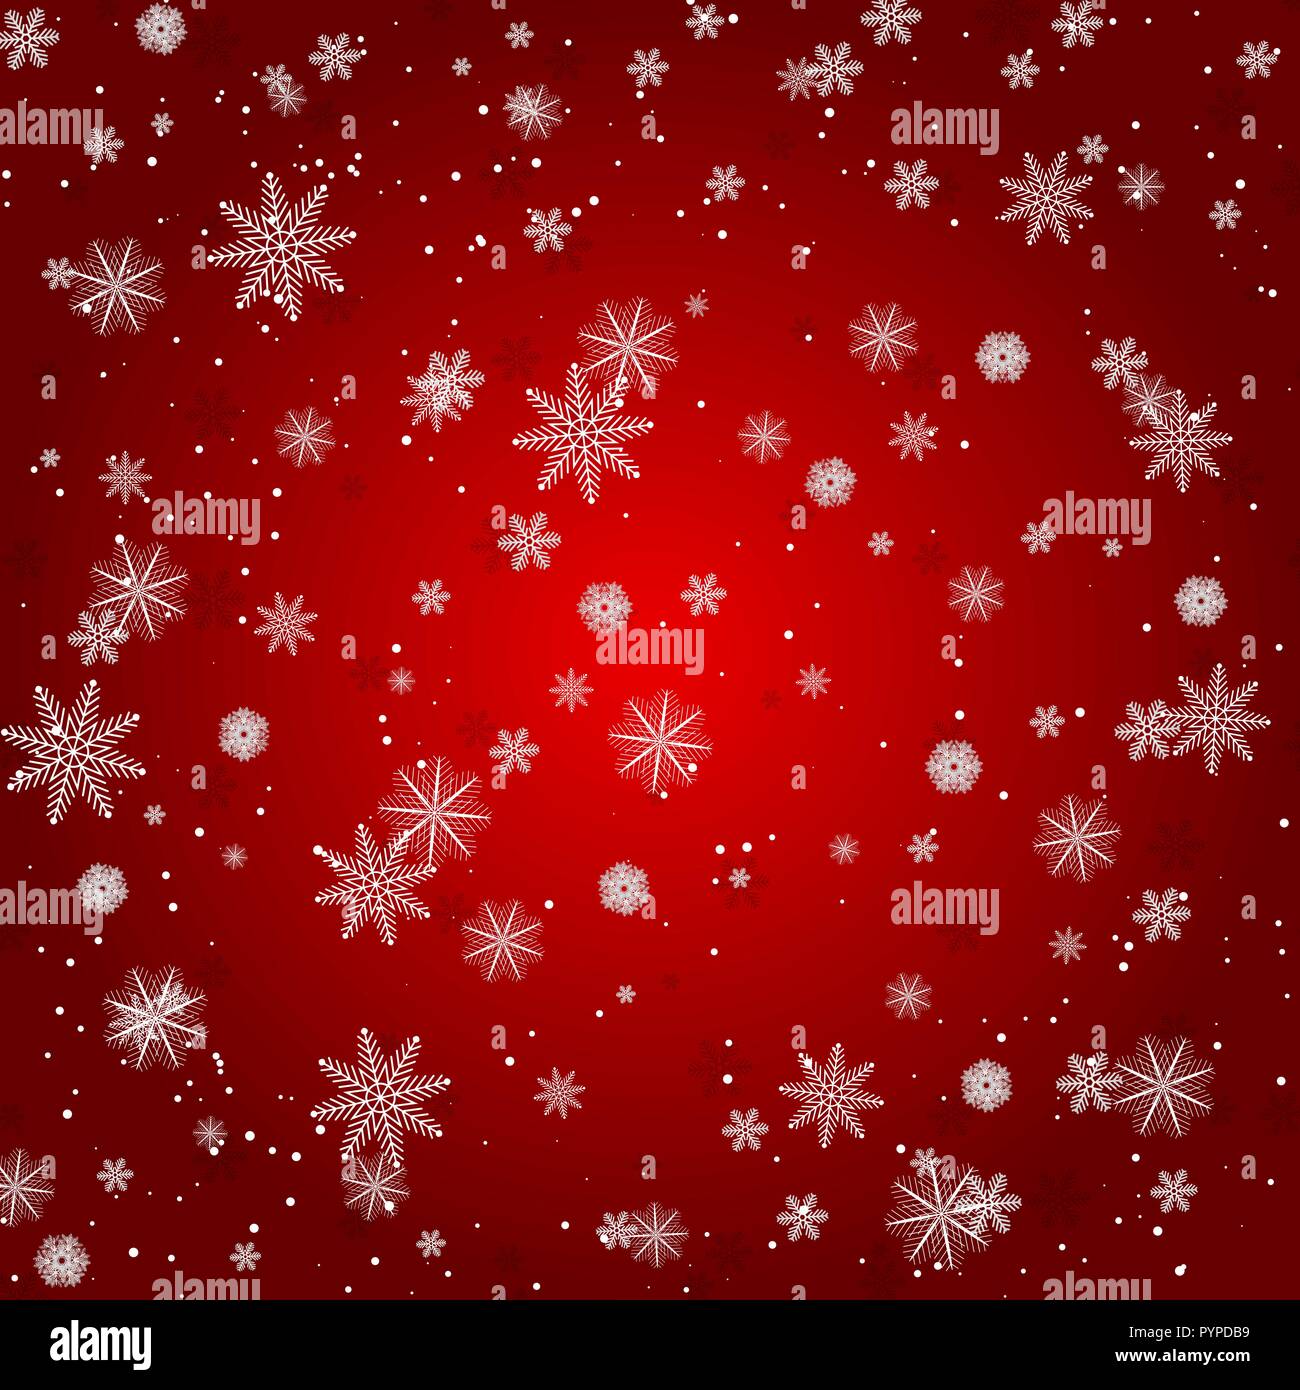 Christmas snowflake with night star light and snow fall abstract bakcground vector illustration eps10 Stock Vector